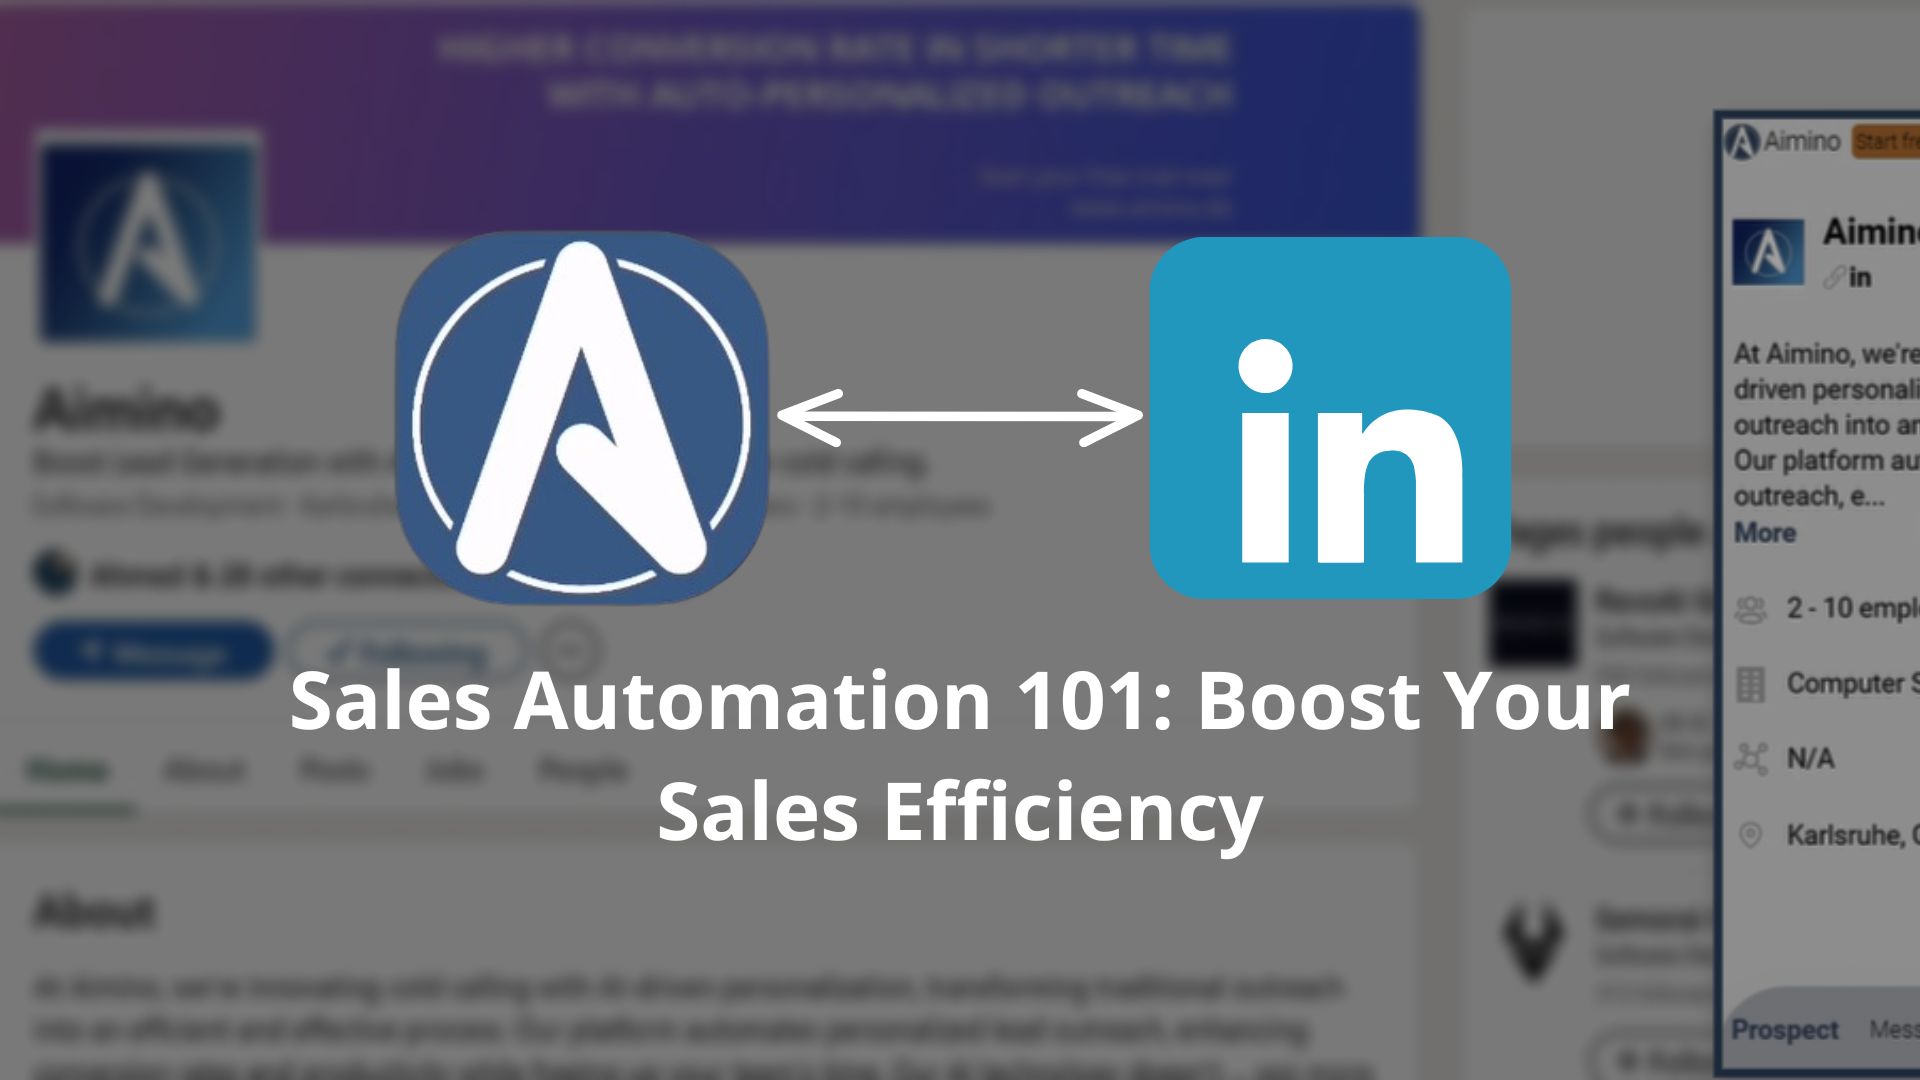 Sales Automation 101: Boost Your Sales Efficiency